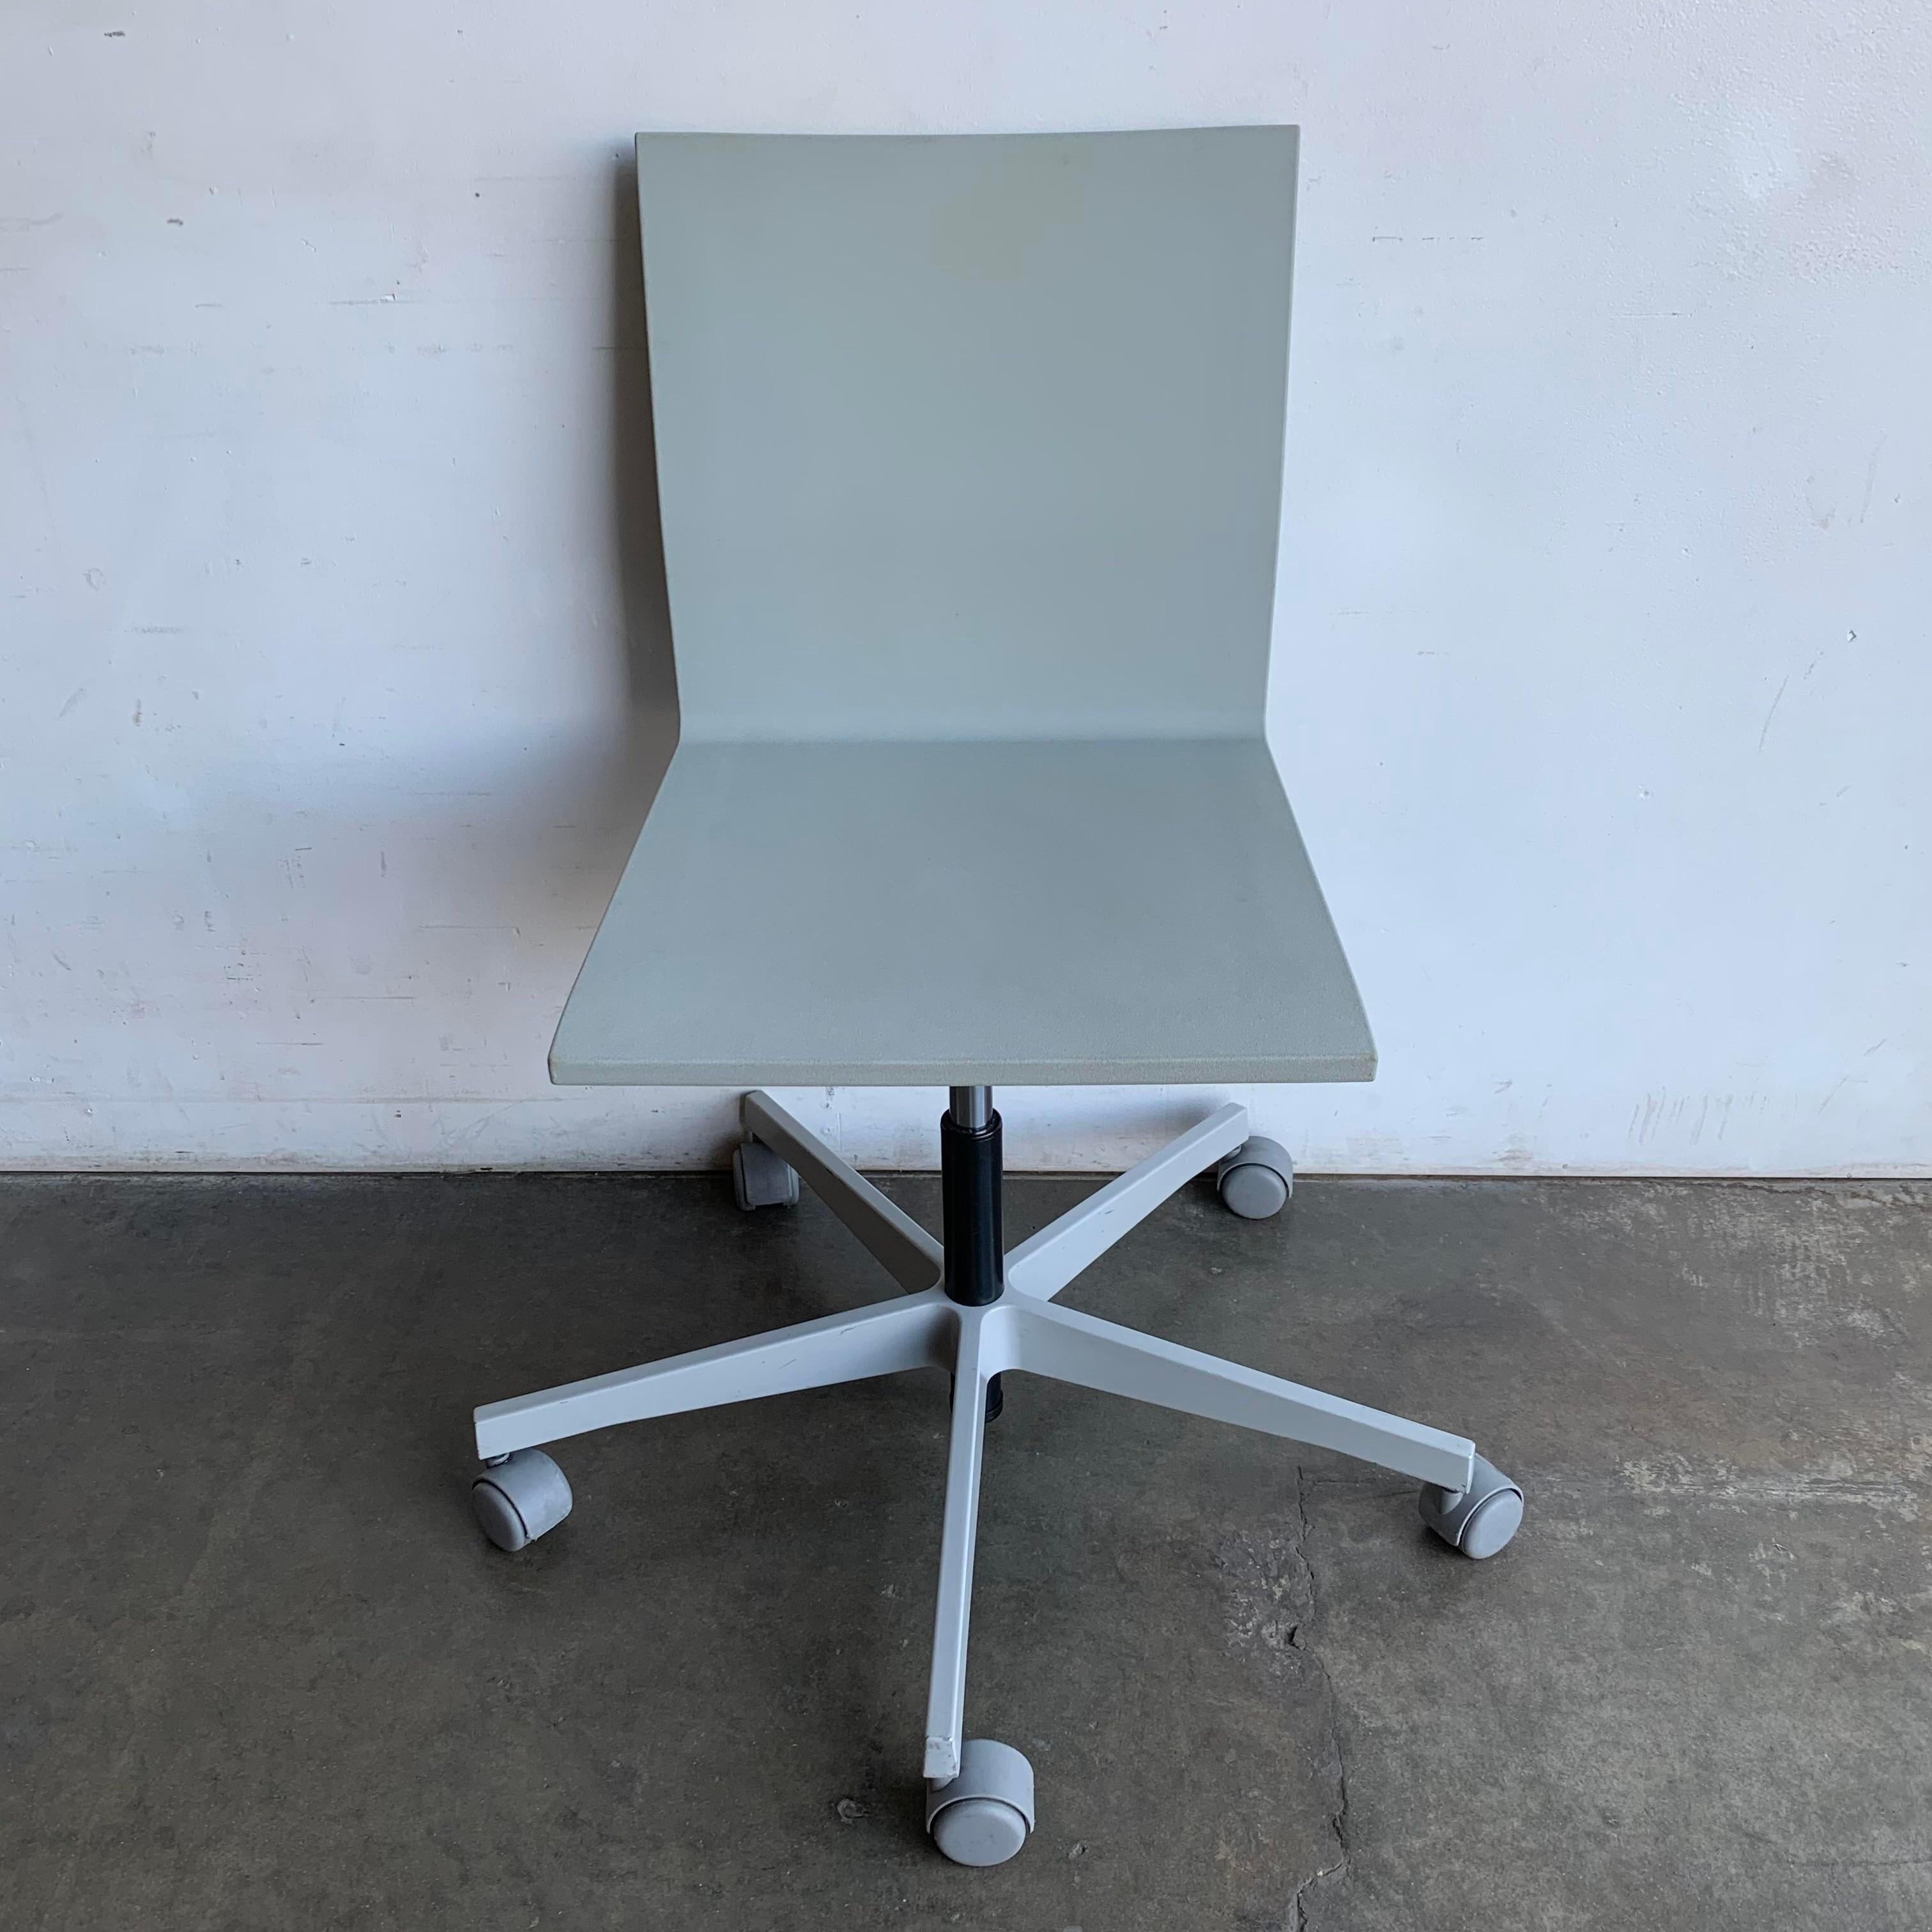 Designed by Maarten Van Severen for Vitra this unique task chair has a flexible shell and offers a rocking mechanism. We have multiples available with and without arms. Please reach out directly for available stock. These were originally from the